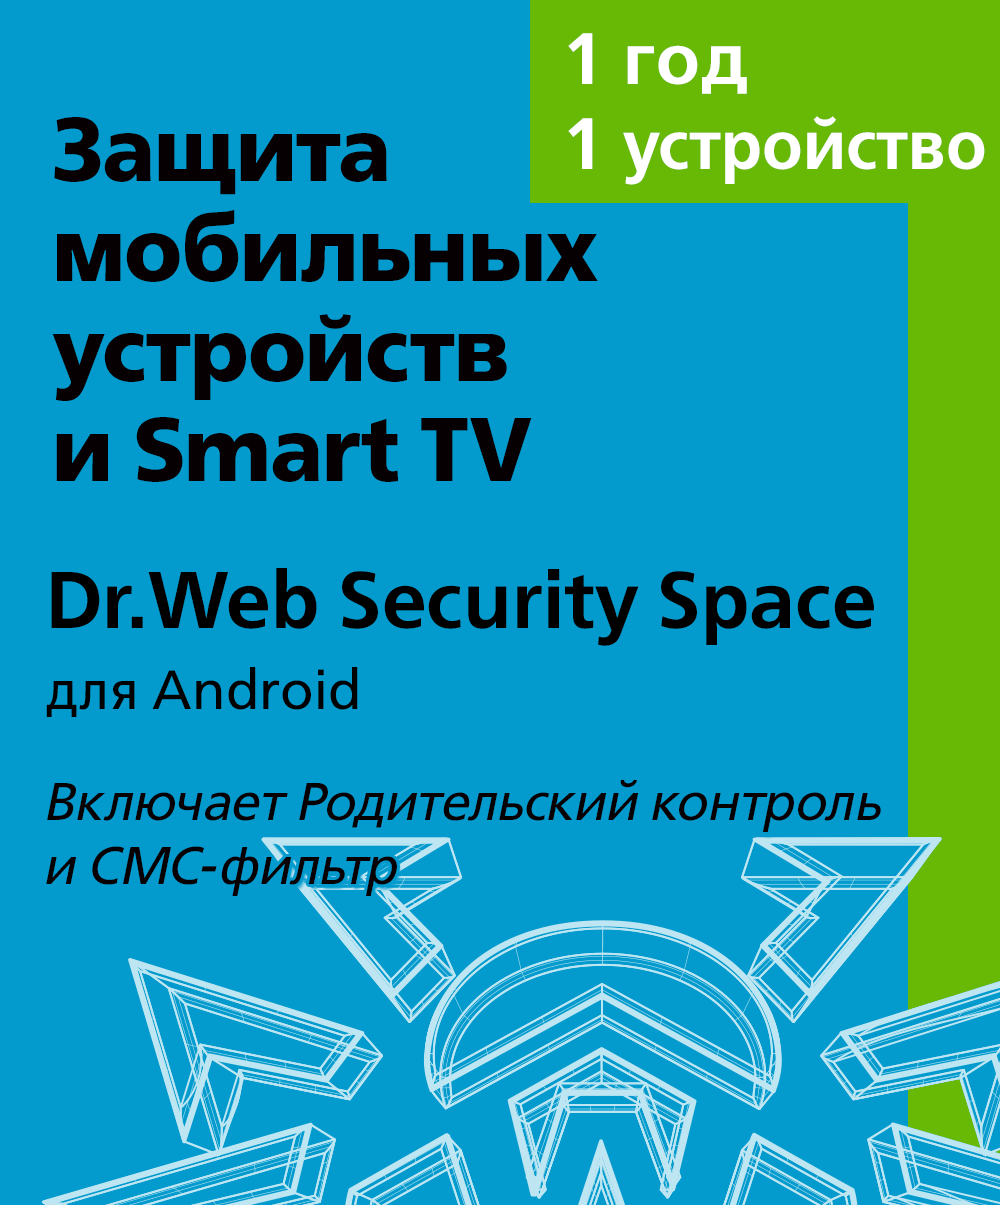 Dr.Web Security Space (for mobile devices) - for 1 device, for 12 months, KZ